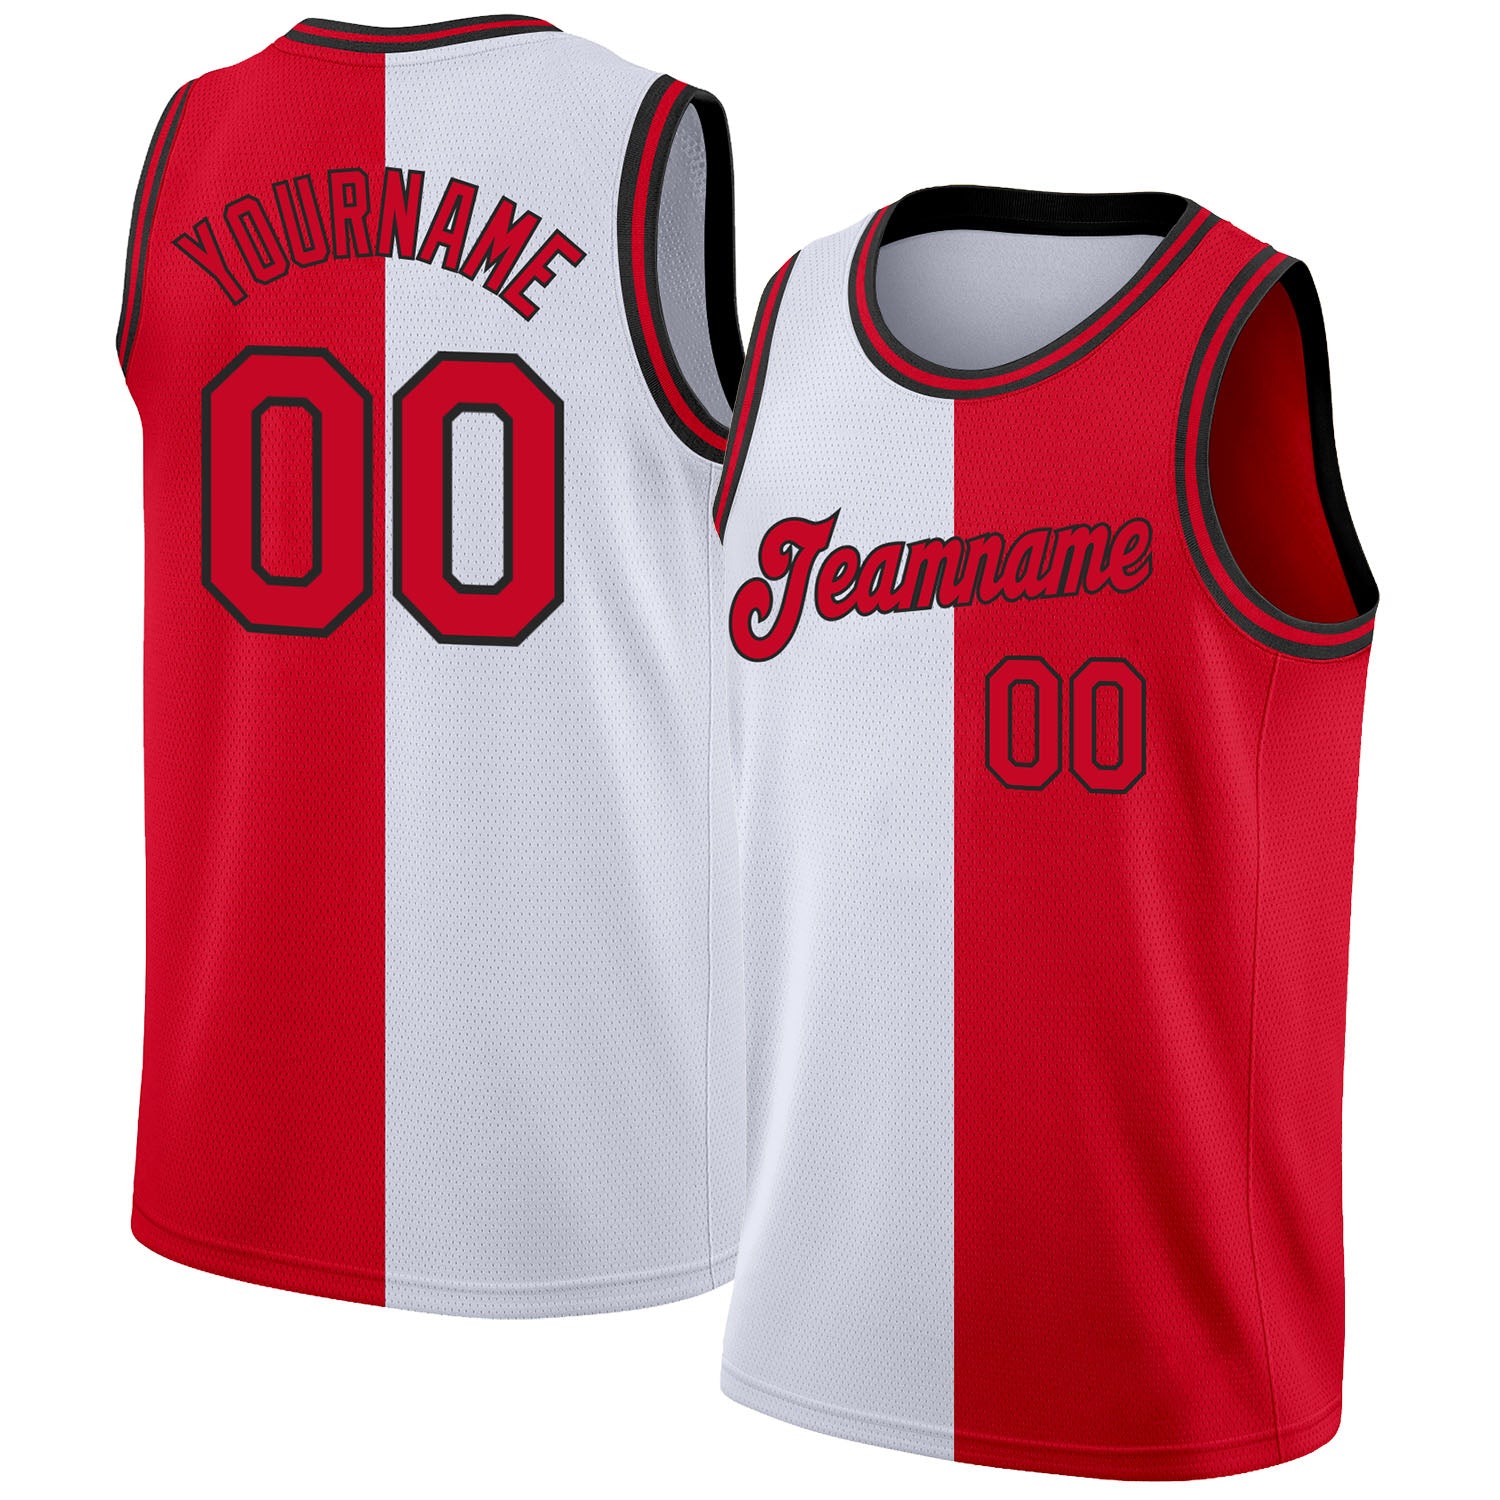 customize nba jersey with your name